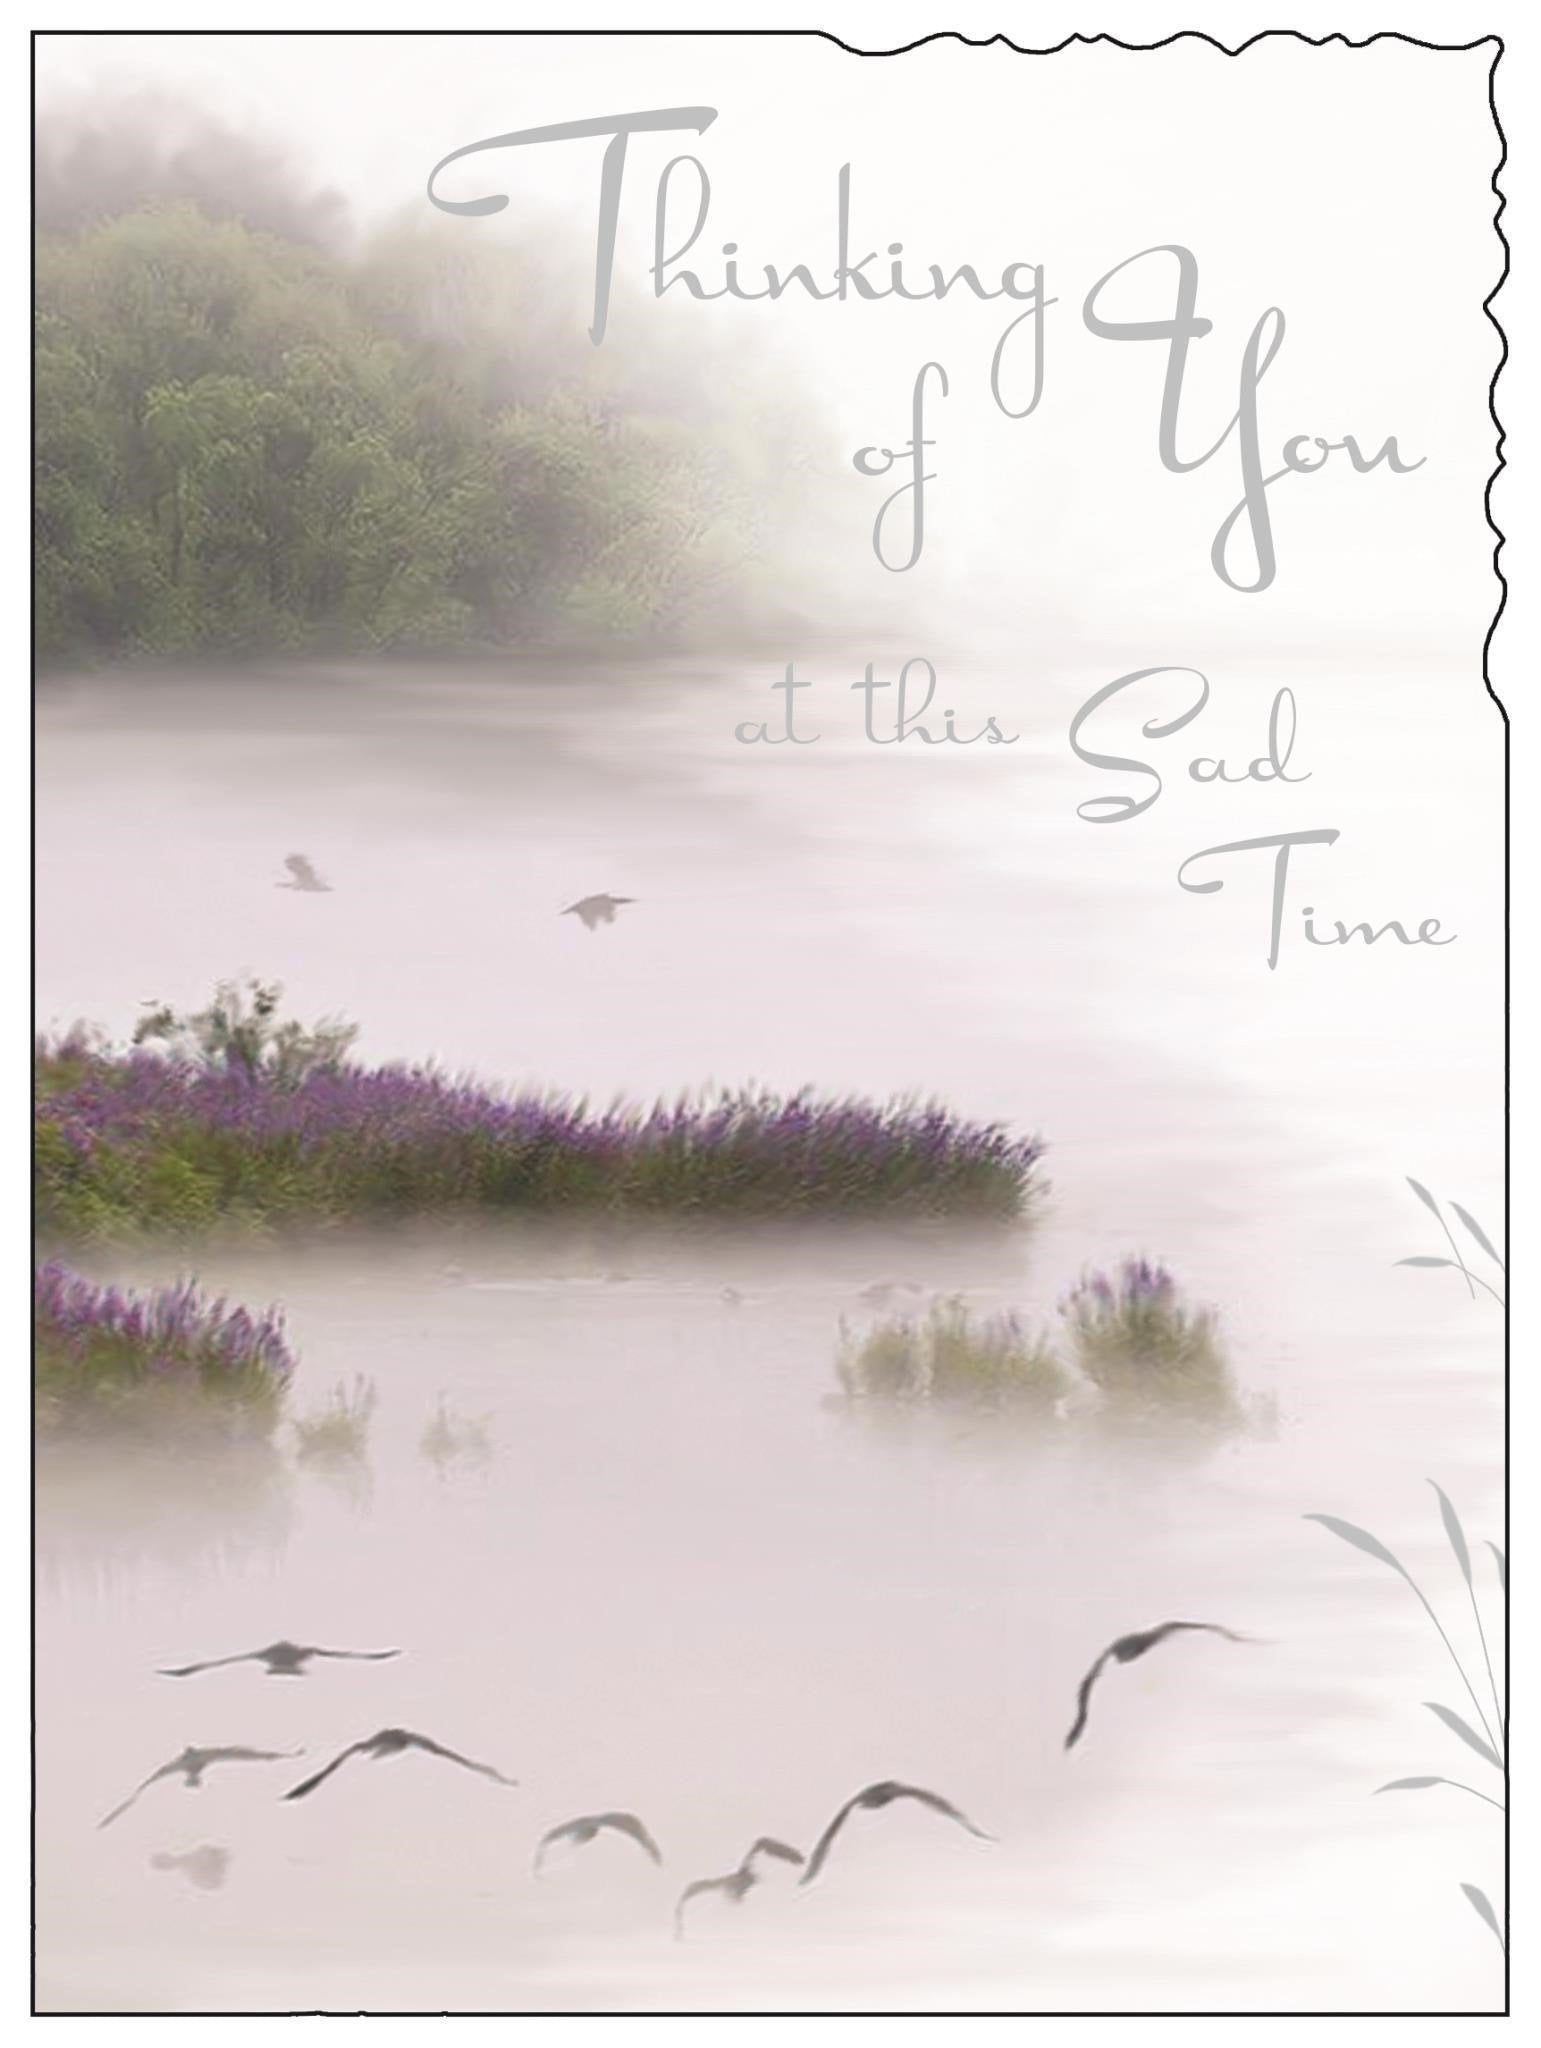 Front of Thinking of You at this Sad Time Lake Greetings Card